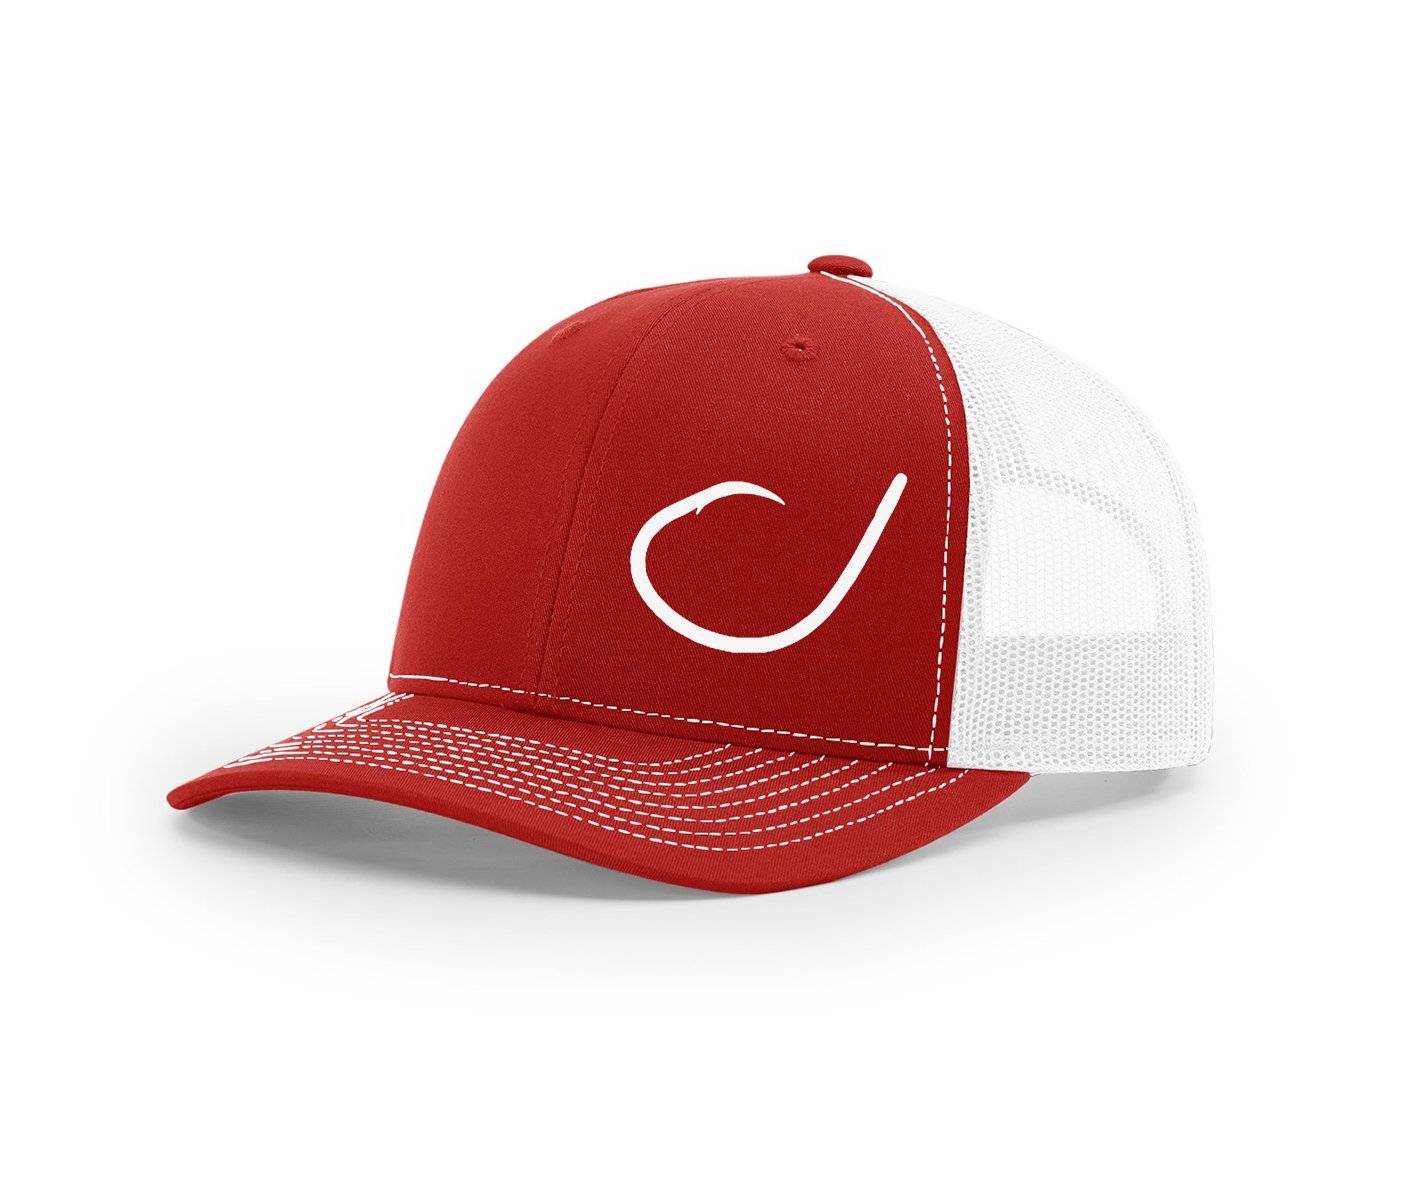 Circle Hook Salty and Swamp Cracker Snapback Hat, Red/White